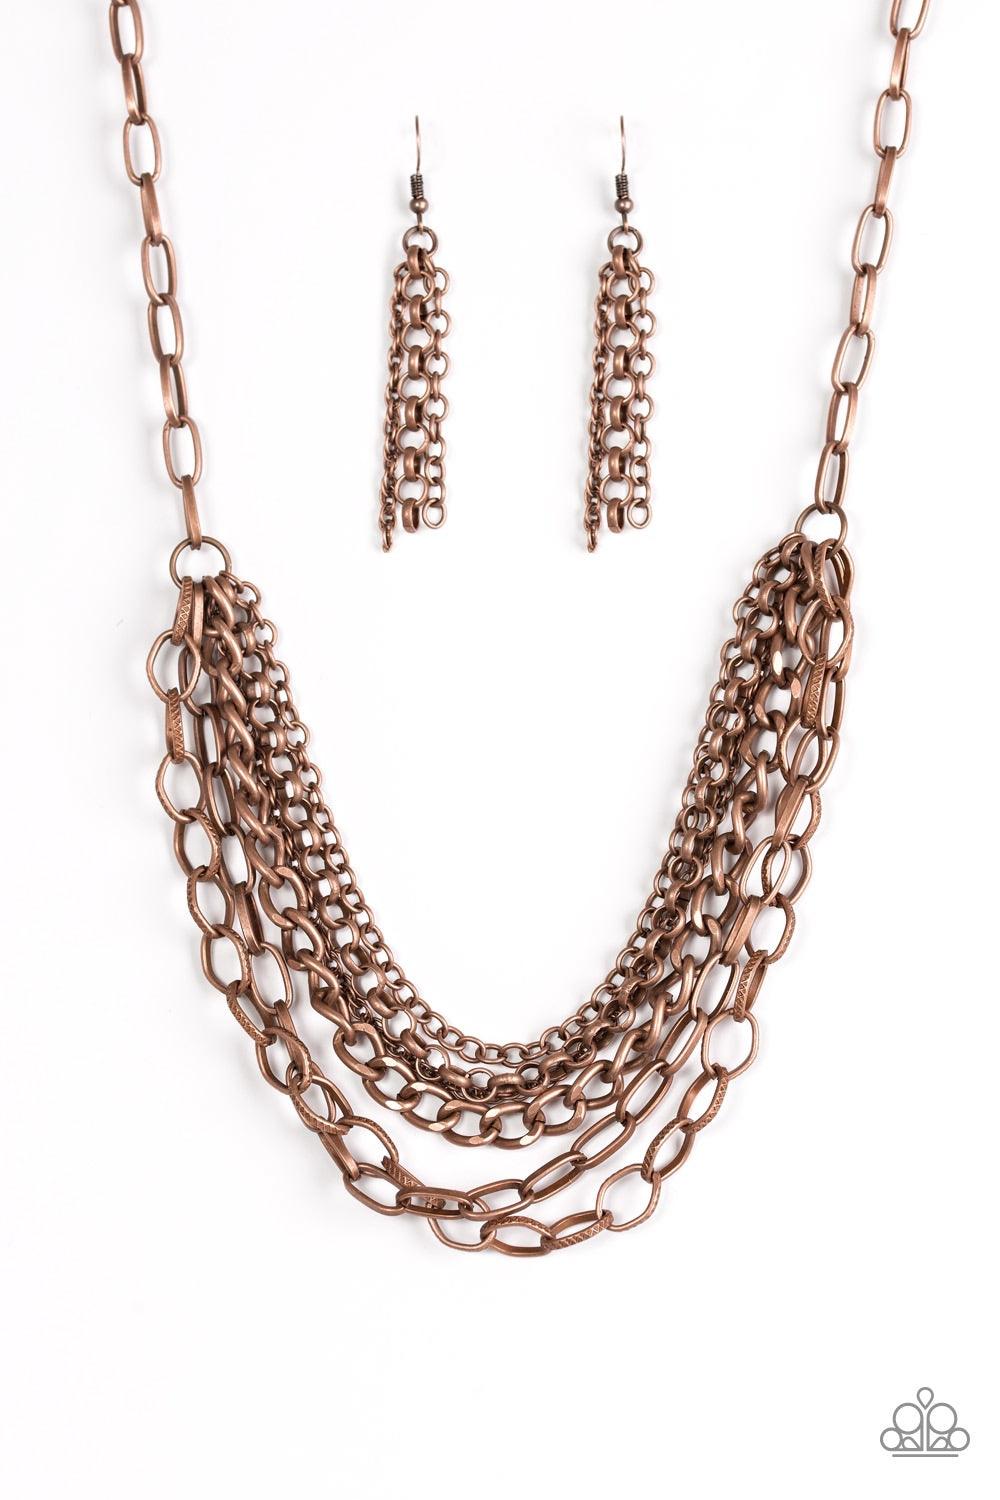 Paparazzi Accessories Word on the Street - Copper Varying in size and shape, glistening copper chains layer below the collar. Featuring smooth and textured links, the mixed metallic palette stacks into a collision of industrial shimmer for an edgy look. F